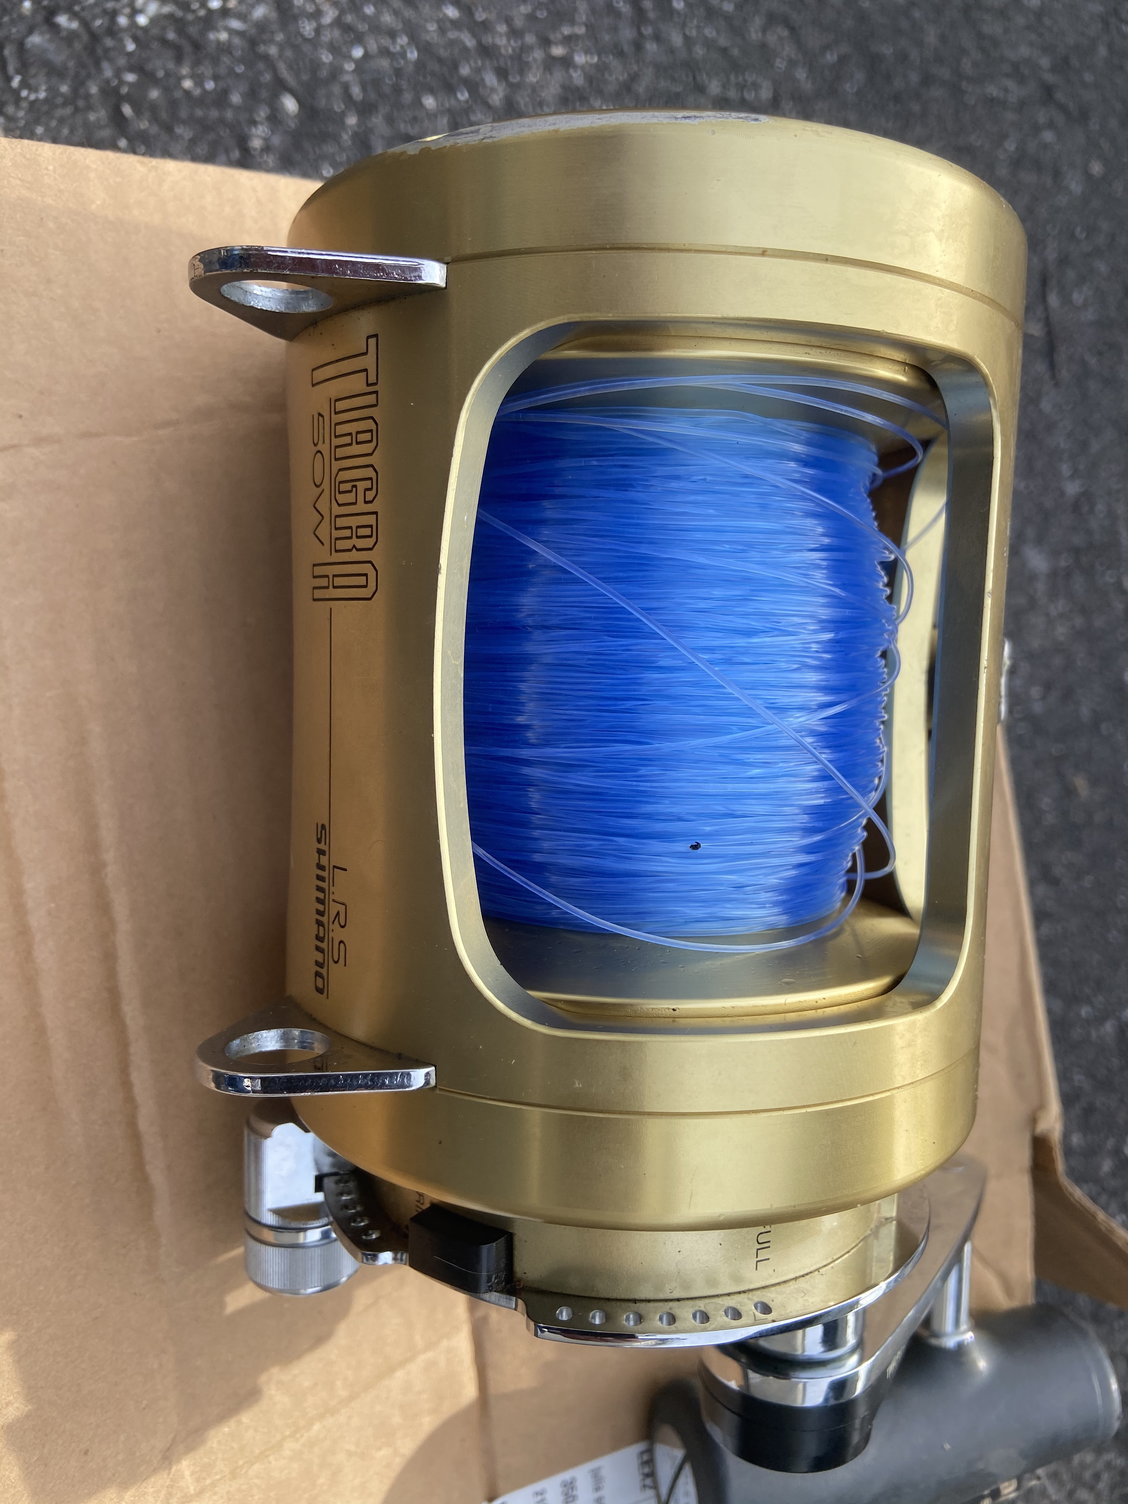 Shimano Tiagra 50W LRS- sell or trade - The Hull Truth - Boating